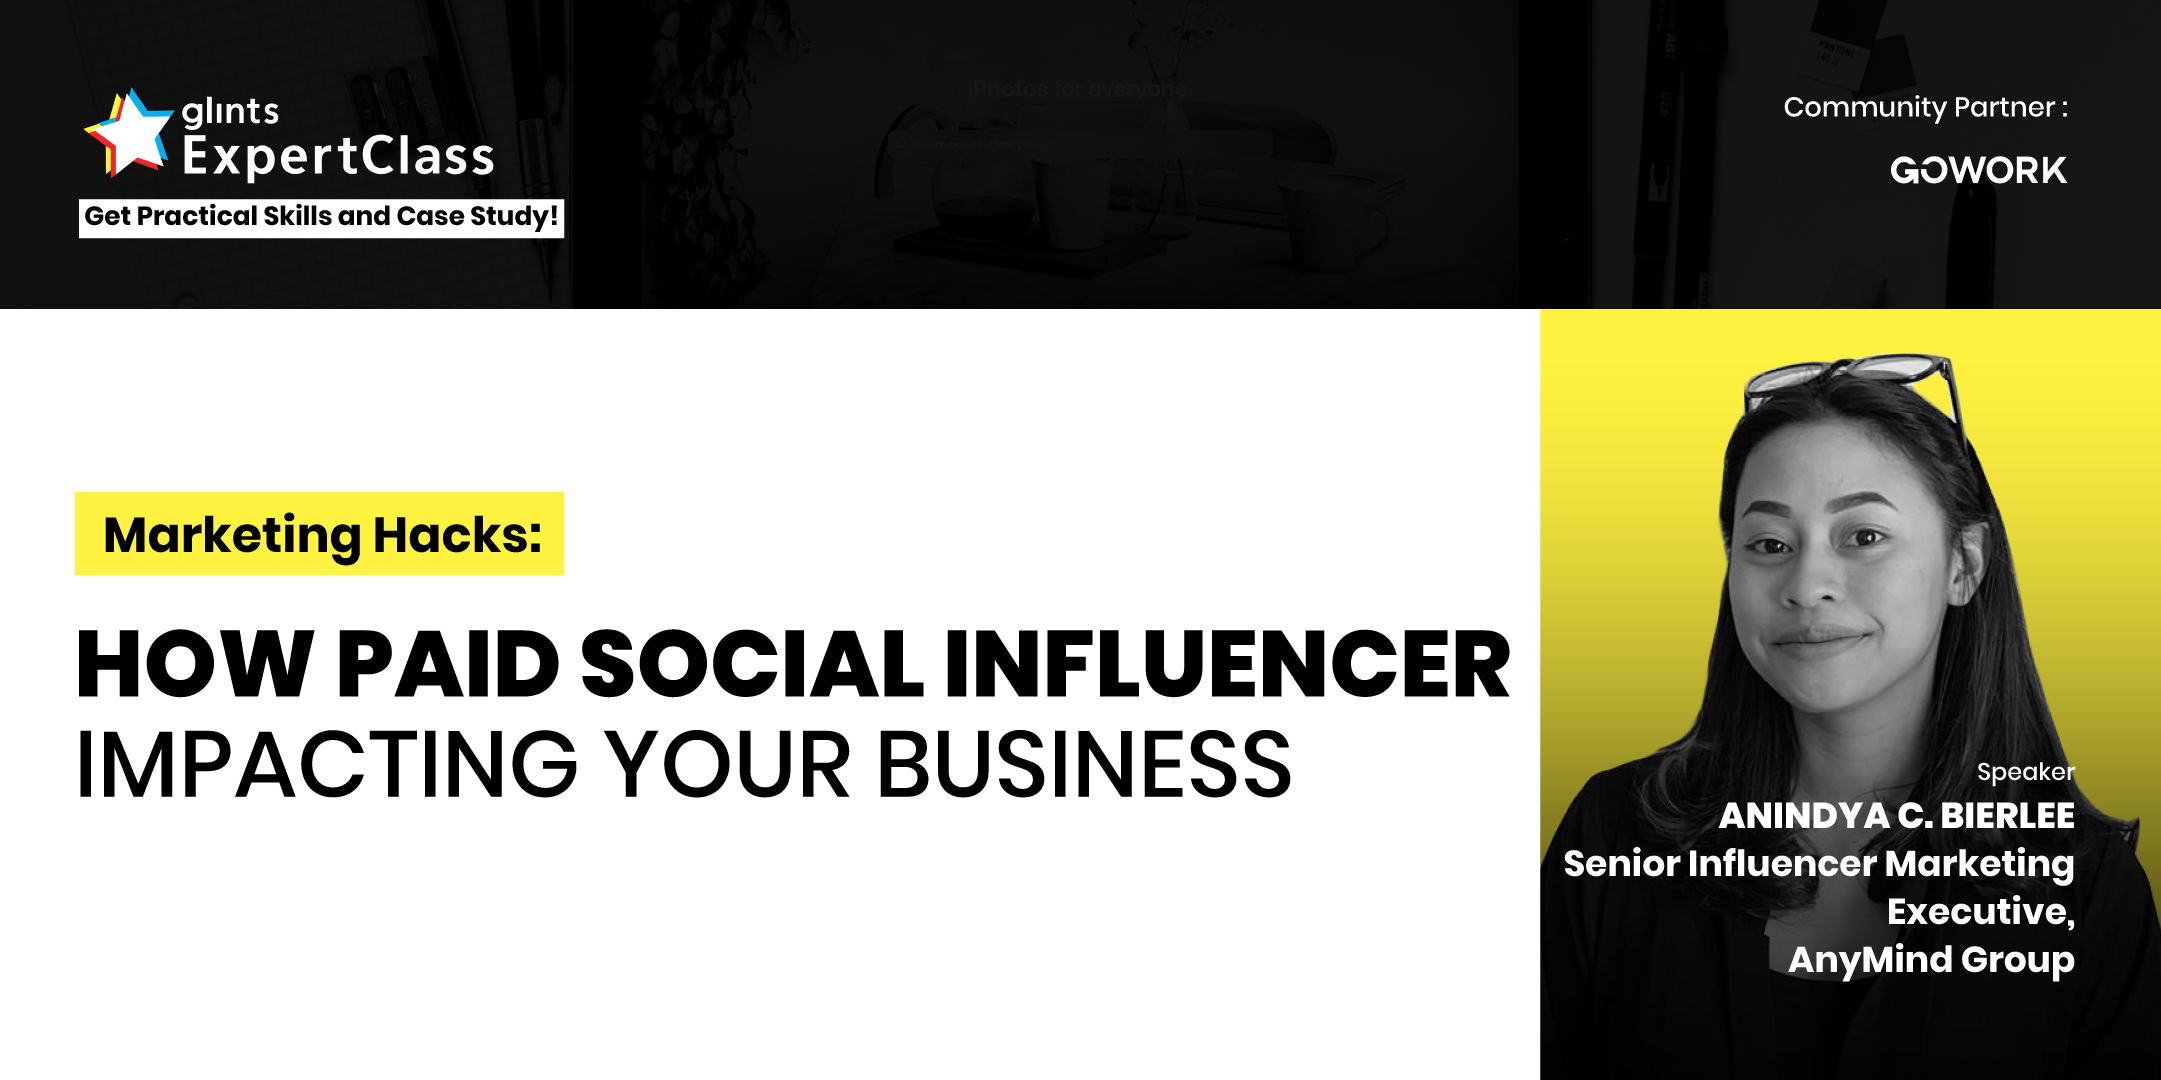 Online Glints Expertclass How Paid Social Influencer Impacting Your Business